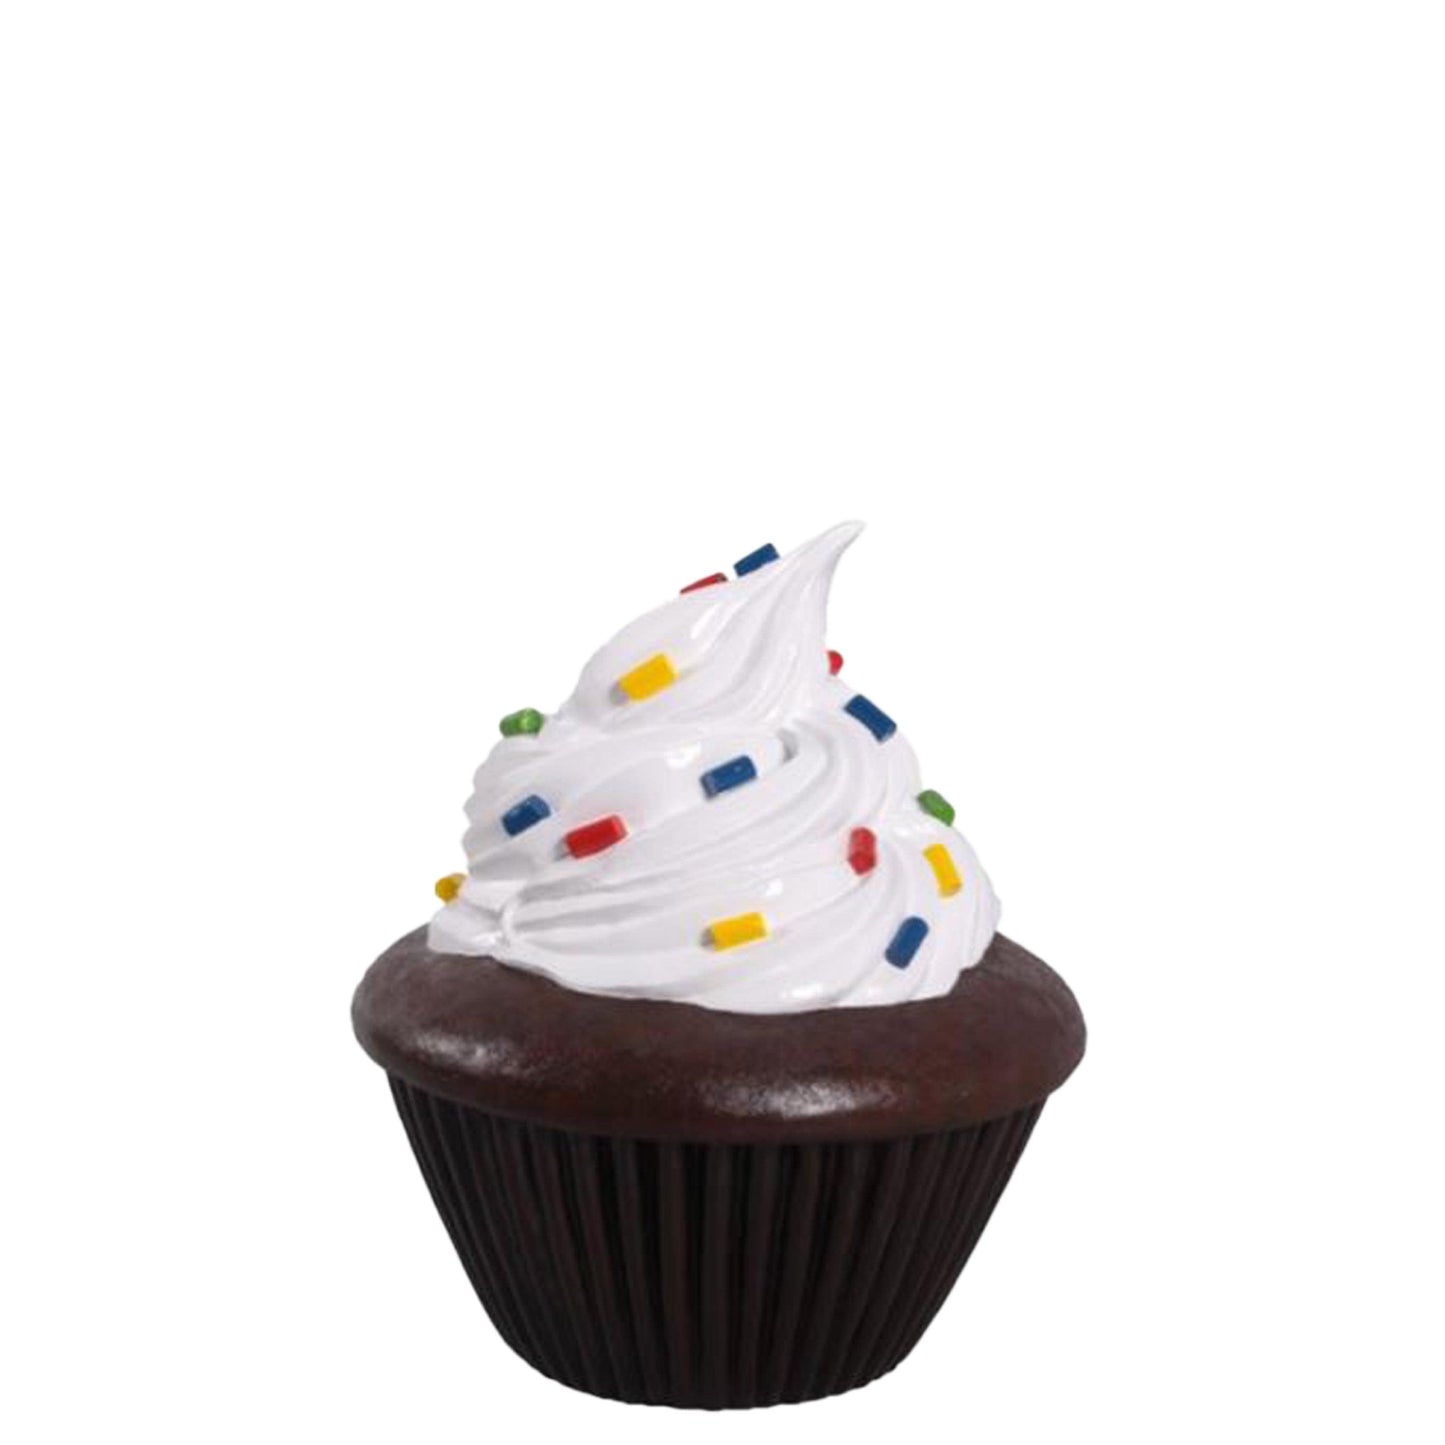 White Chocolate Cupcake Statue With Sprinkles - LM Treasures Prop Rentals 